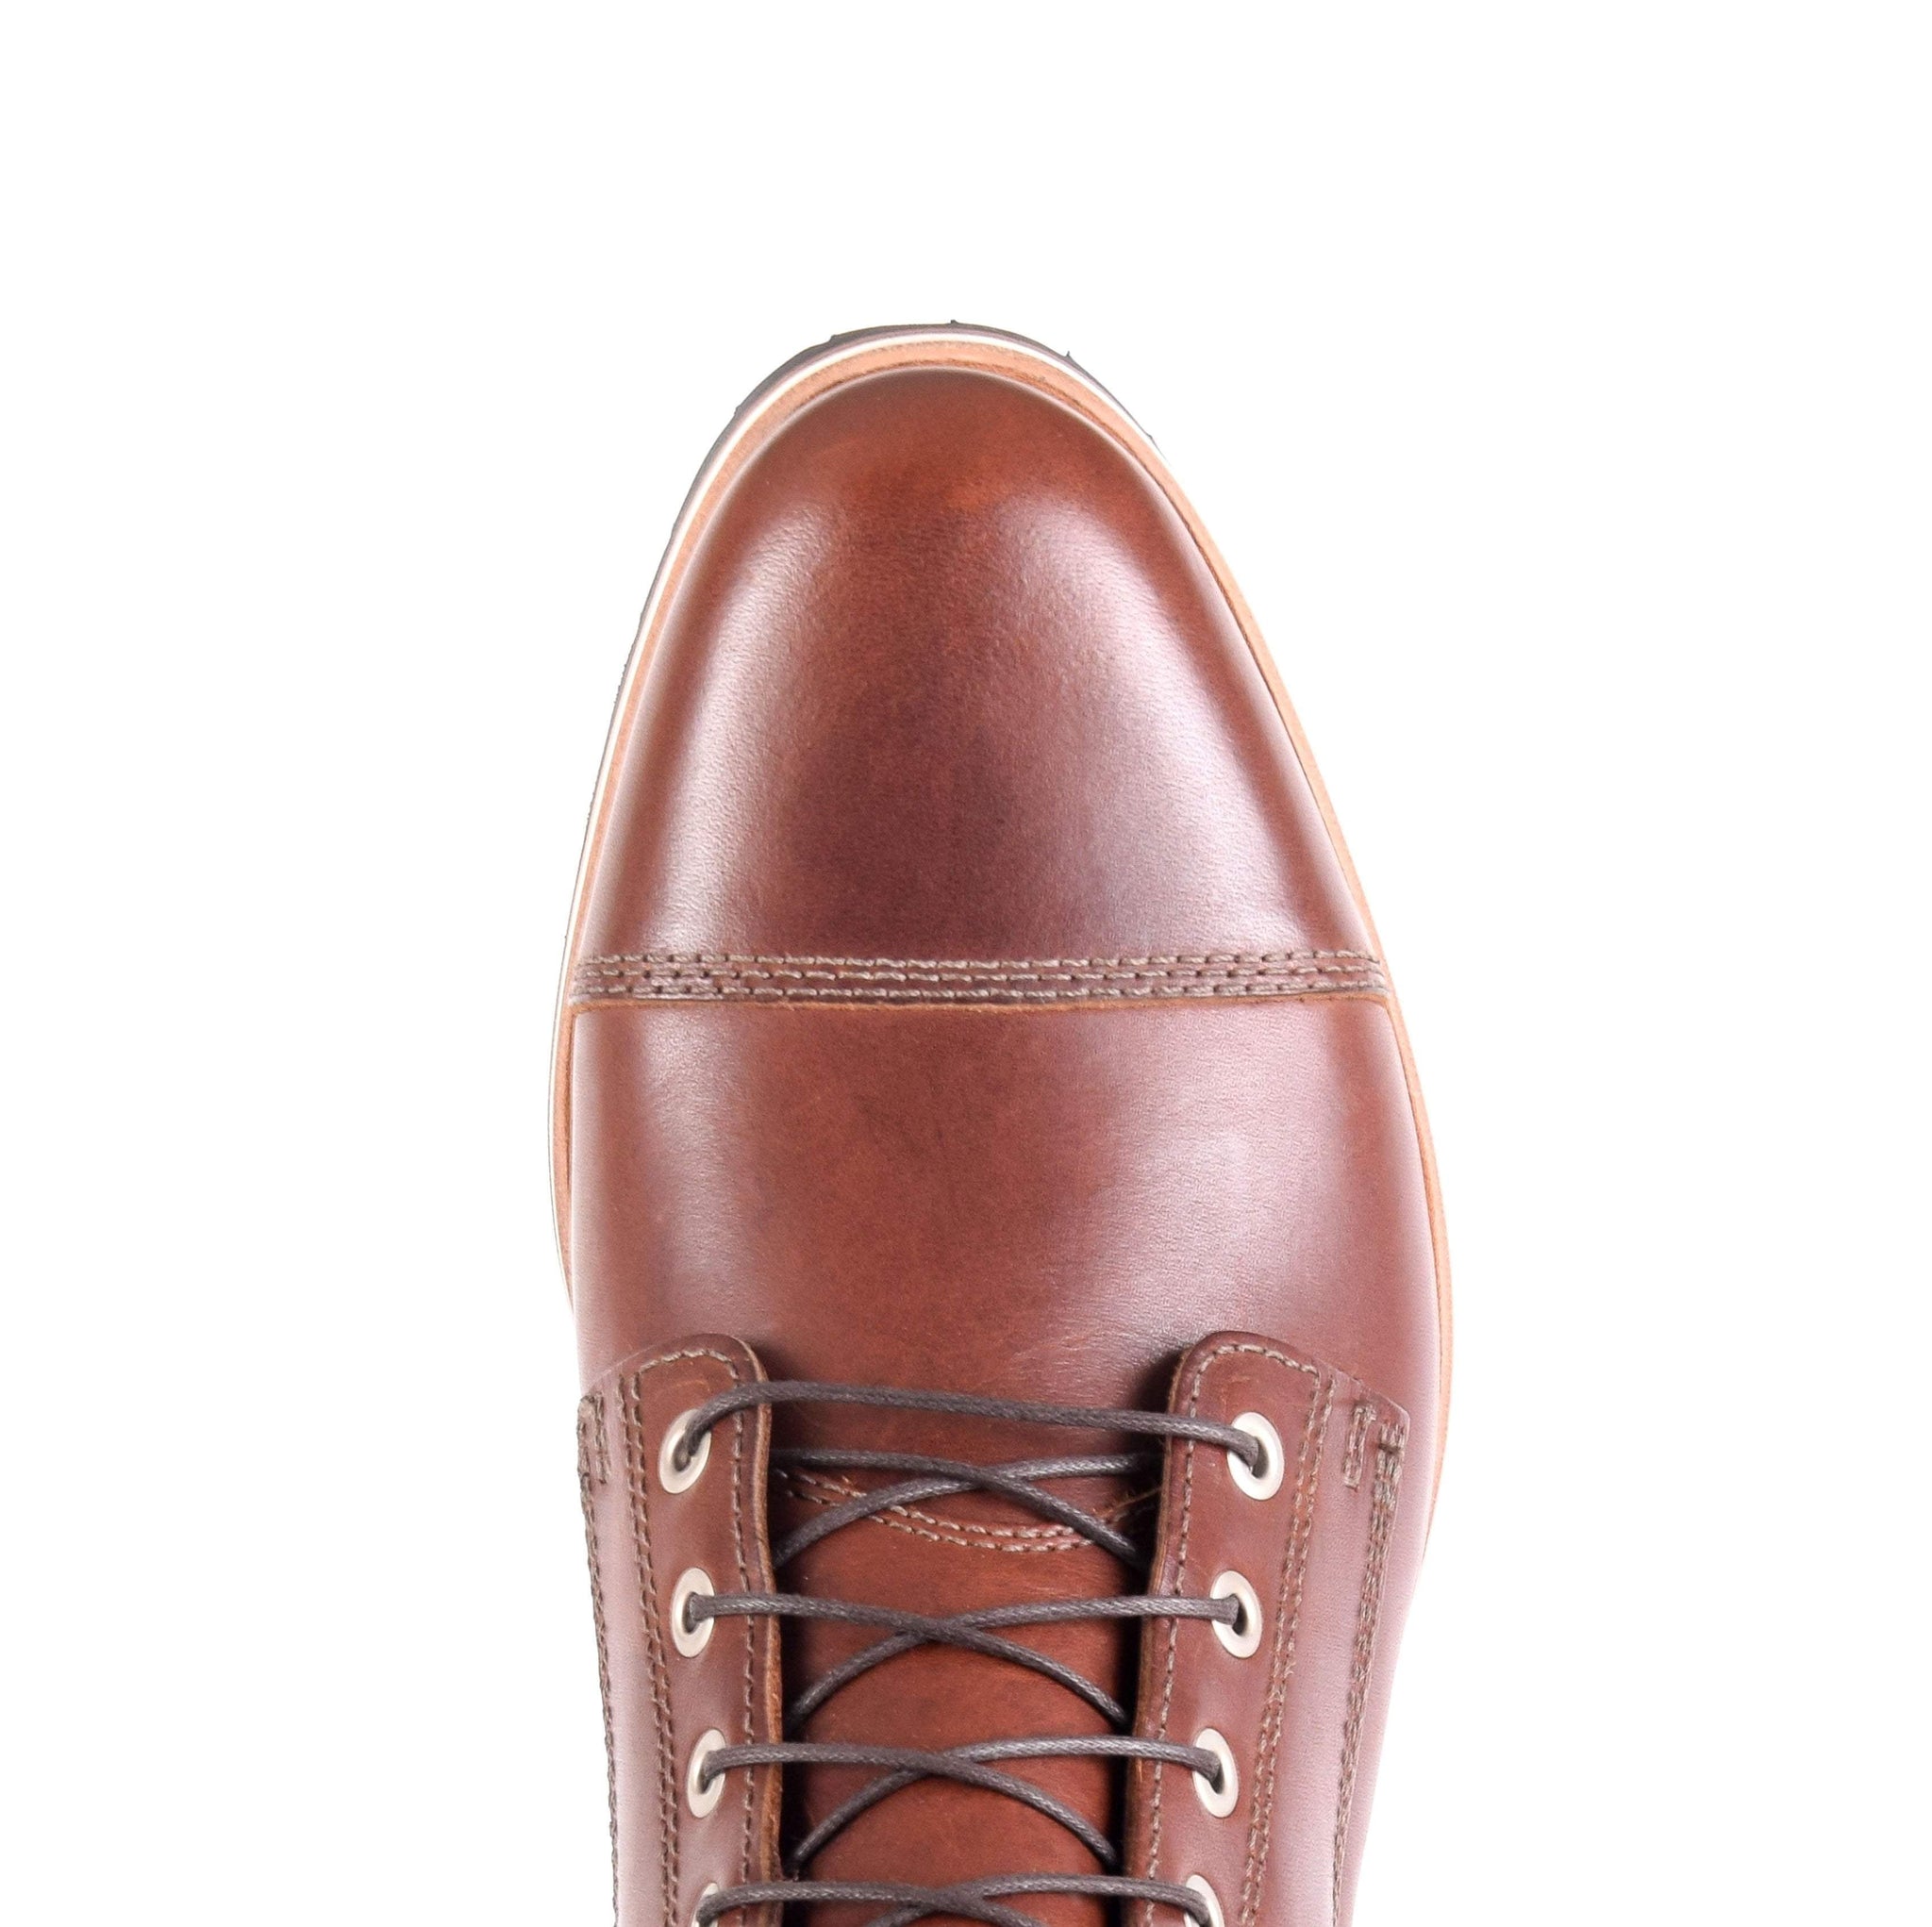 The Hollis Brown by HELM Boots